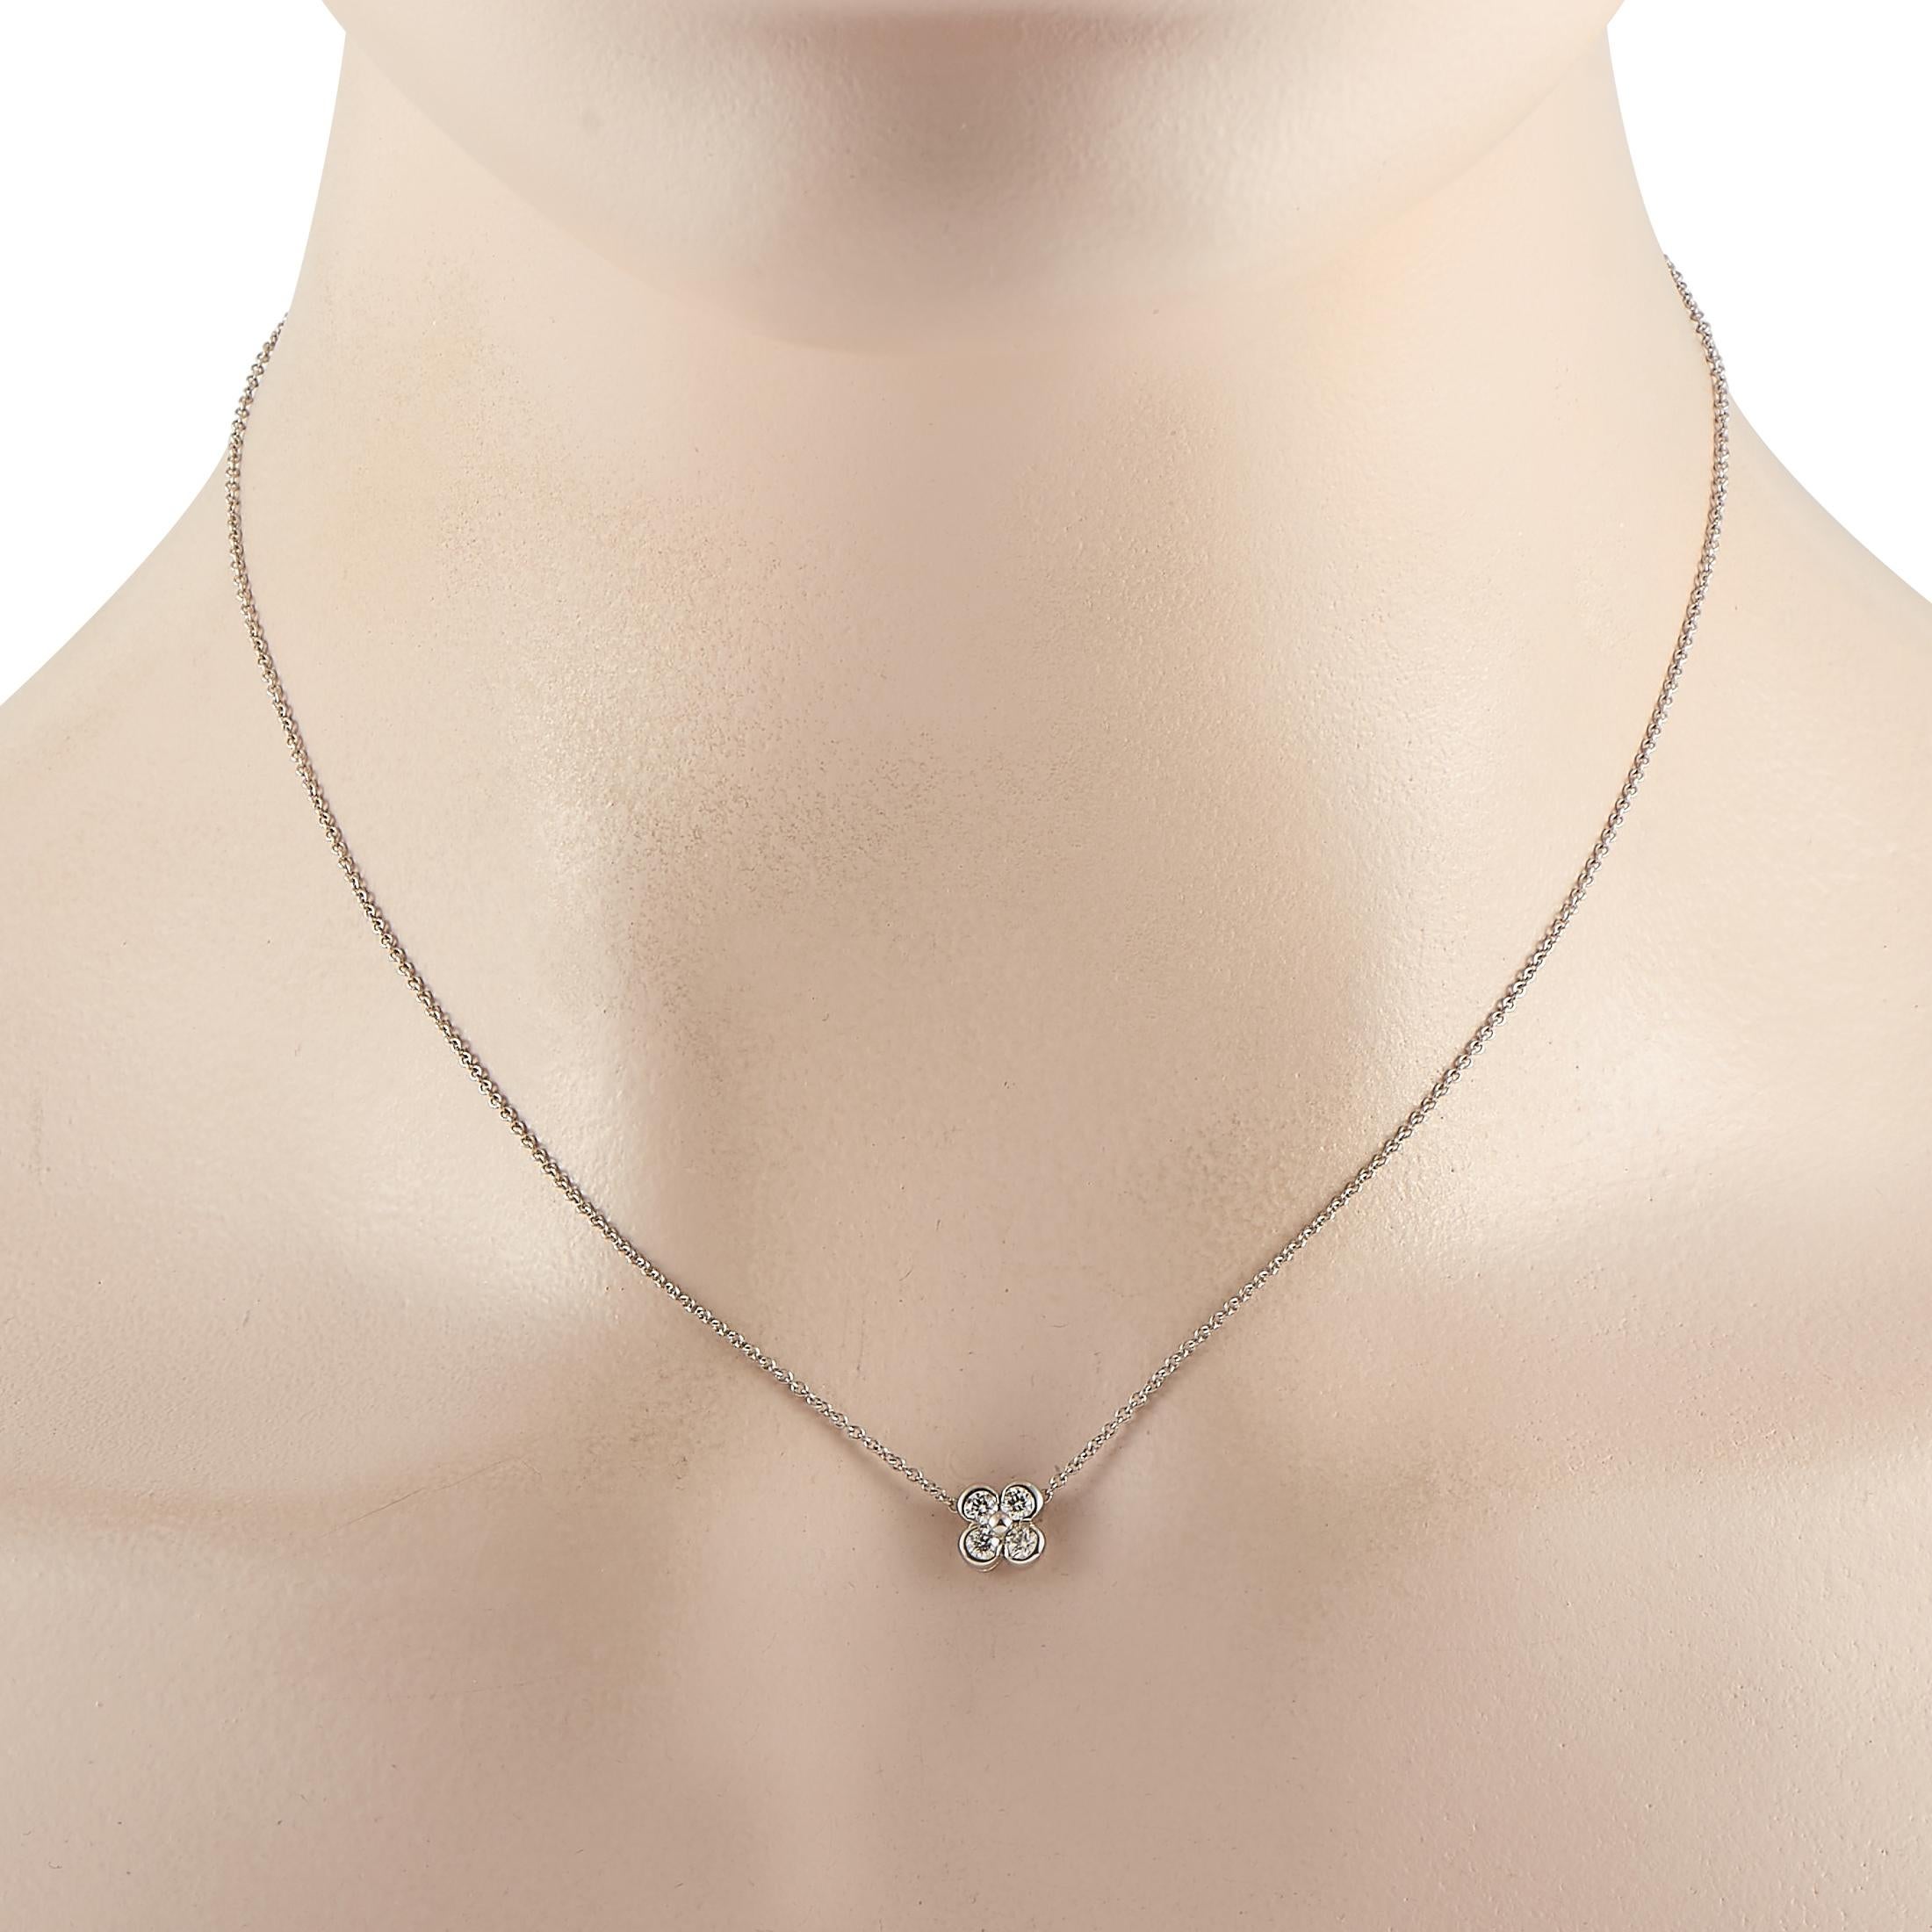 This Tiffany & Co. necklace is made of platinum and embellished with diamonds that amount to 0.20 carats. The necklace weighs 3.5 grams and boasts a 16” chain and a pendant that measures 0.25” in length and 0.25” in width.
 
 Offered in estate